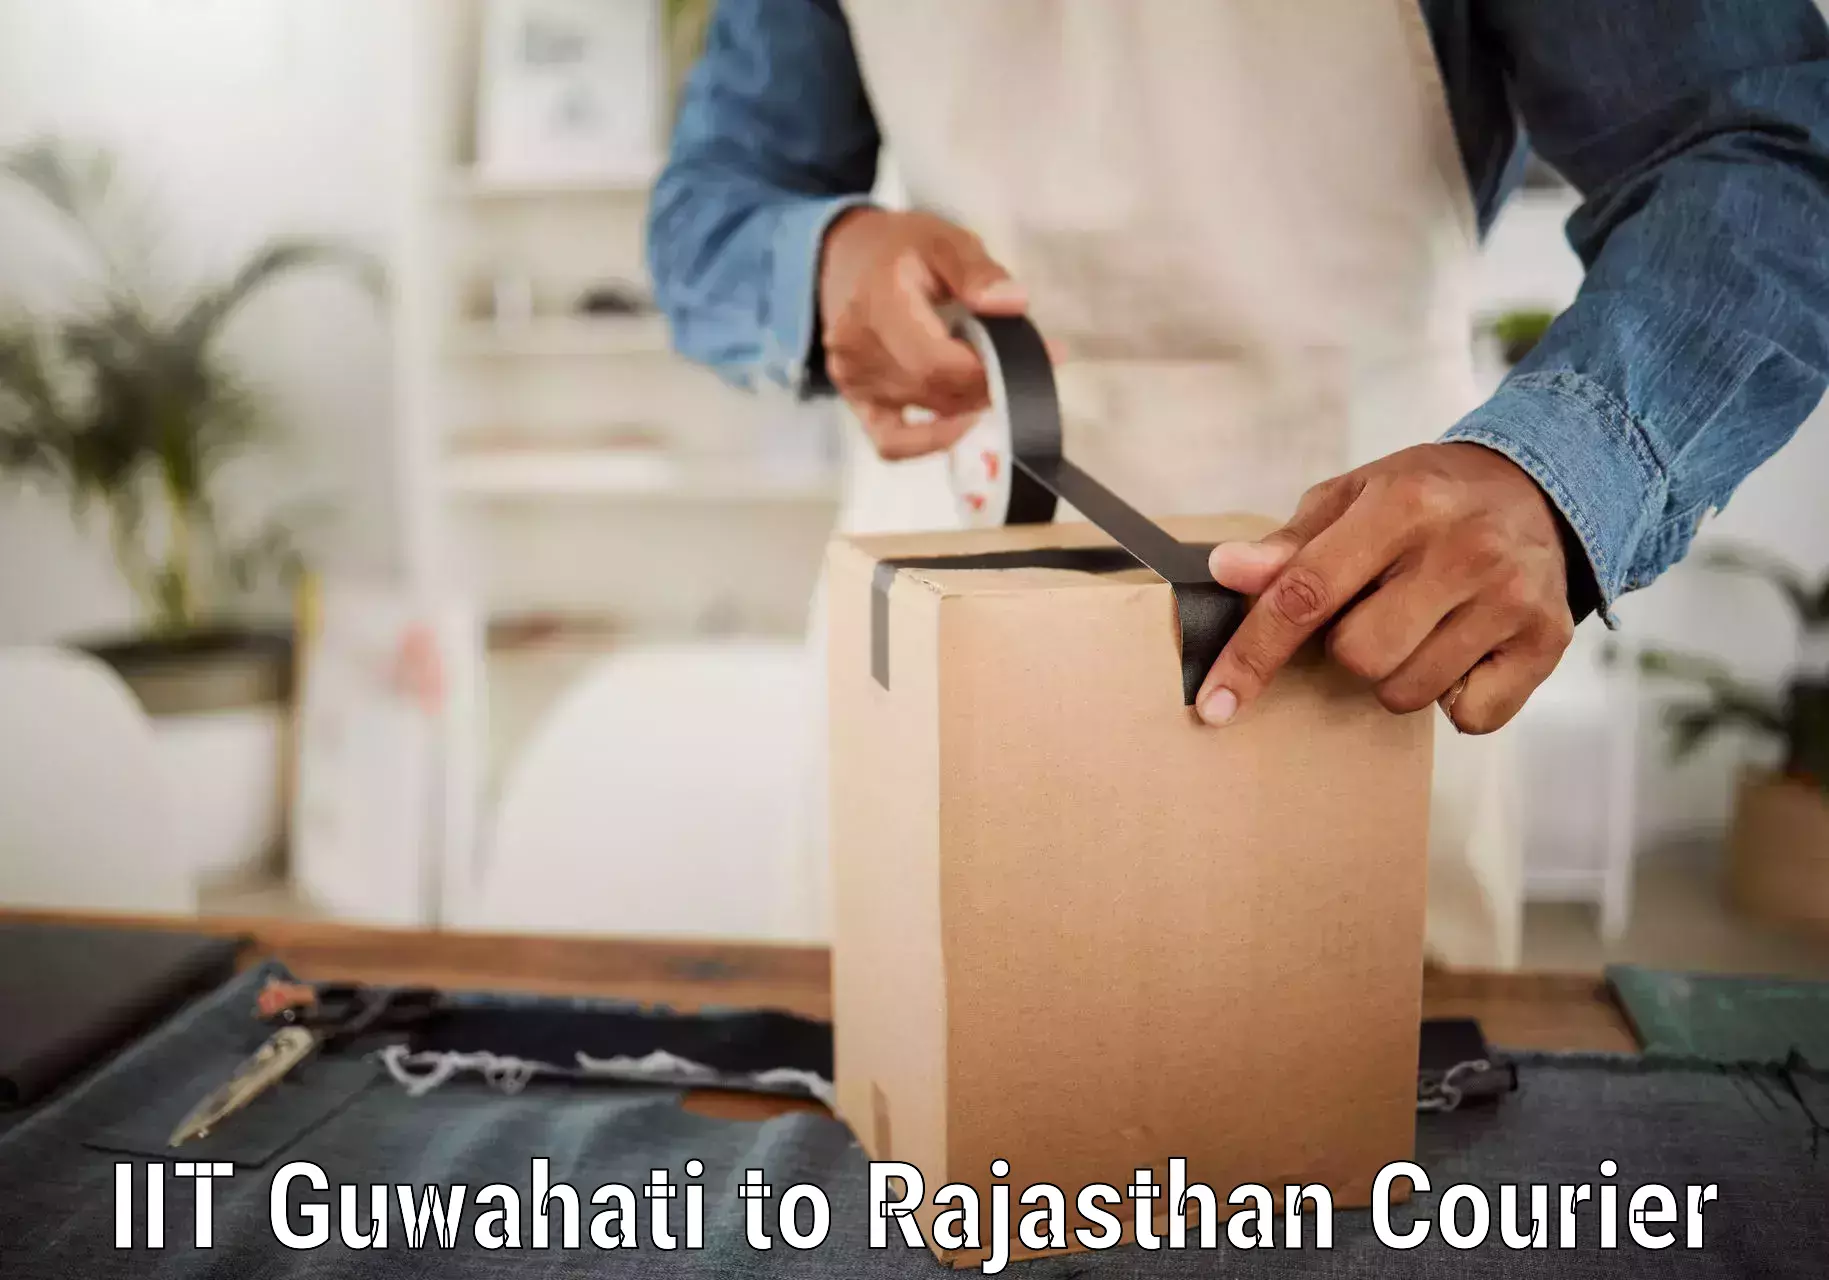 Round-the-clock parcel delivery IIT Guwahati to Birla Institute of Technology and Science Pilani